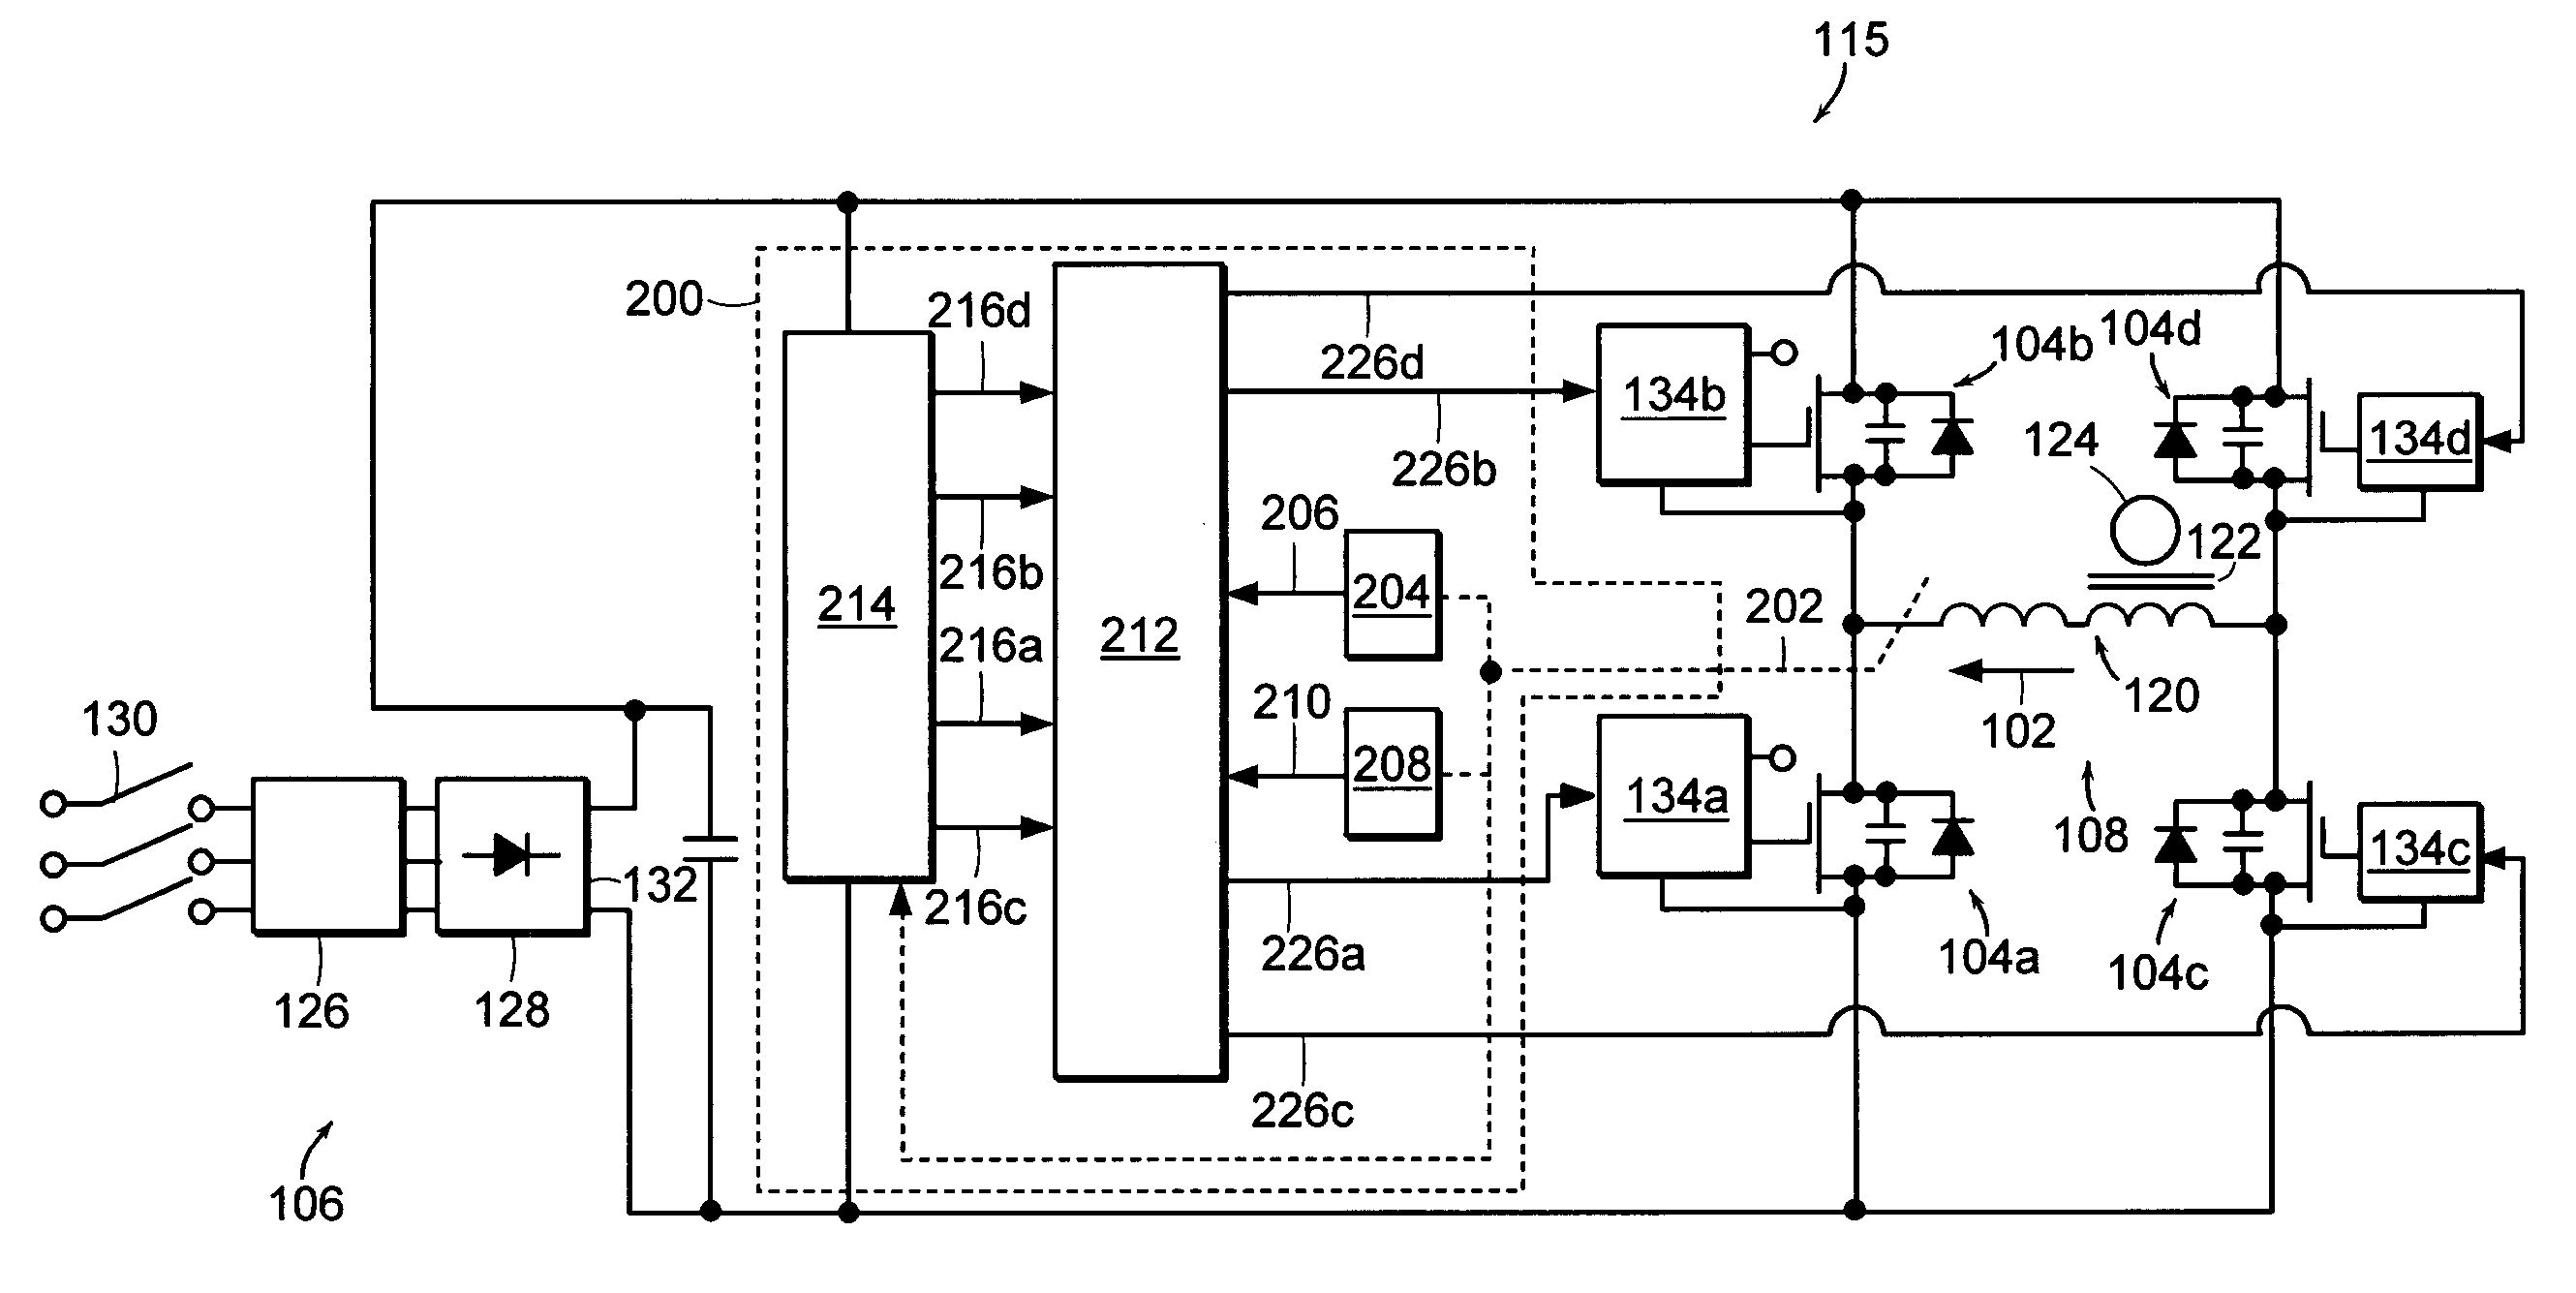 Power supply controller to actively drive a load current when the load current exceeds a set point